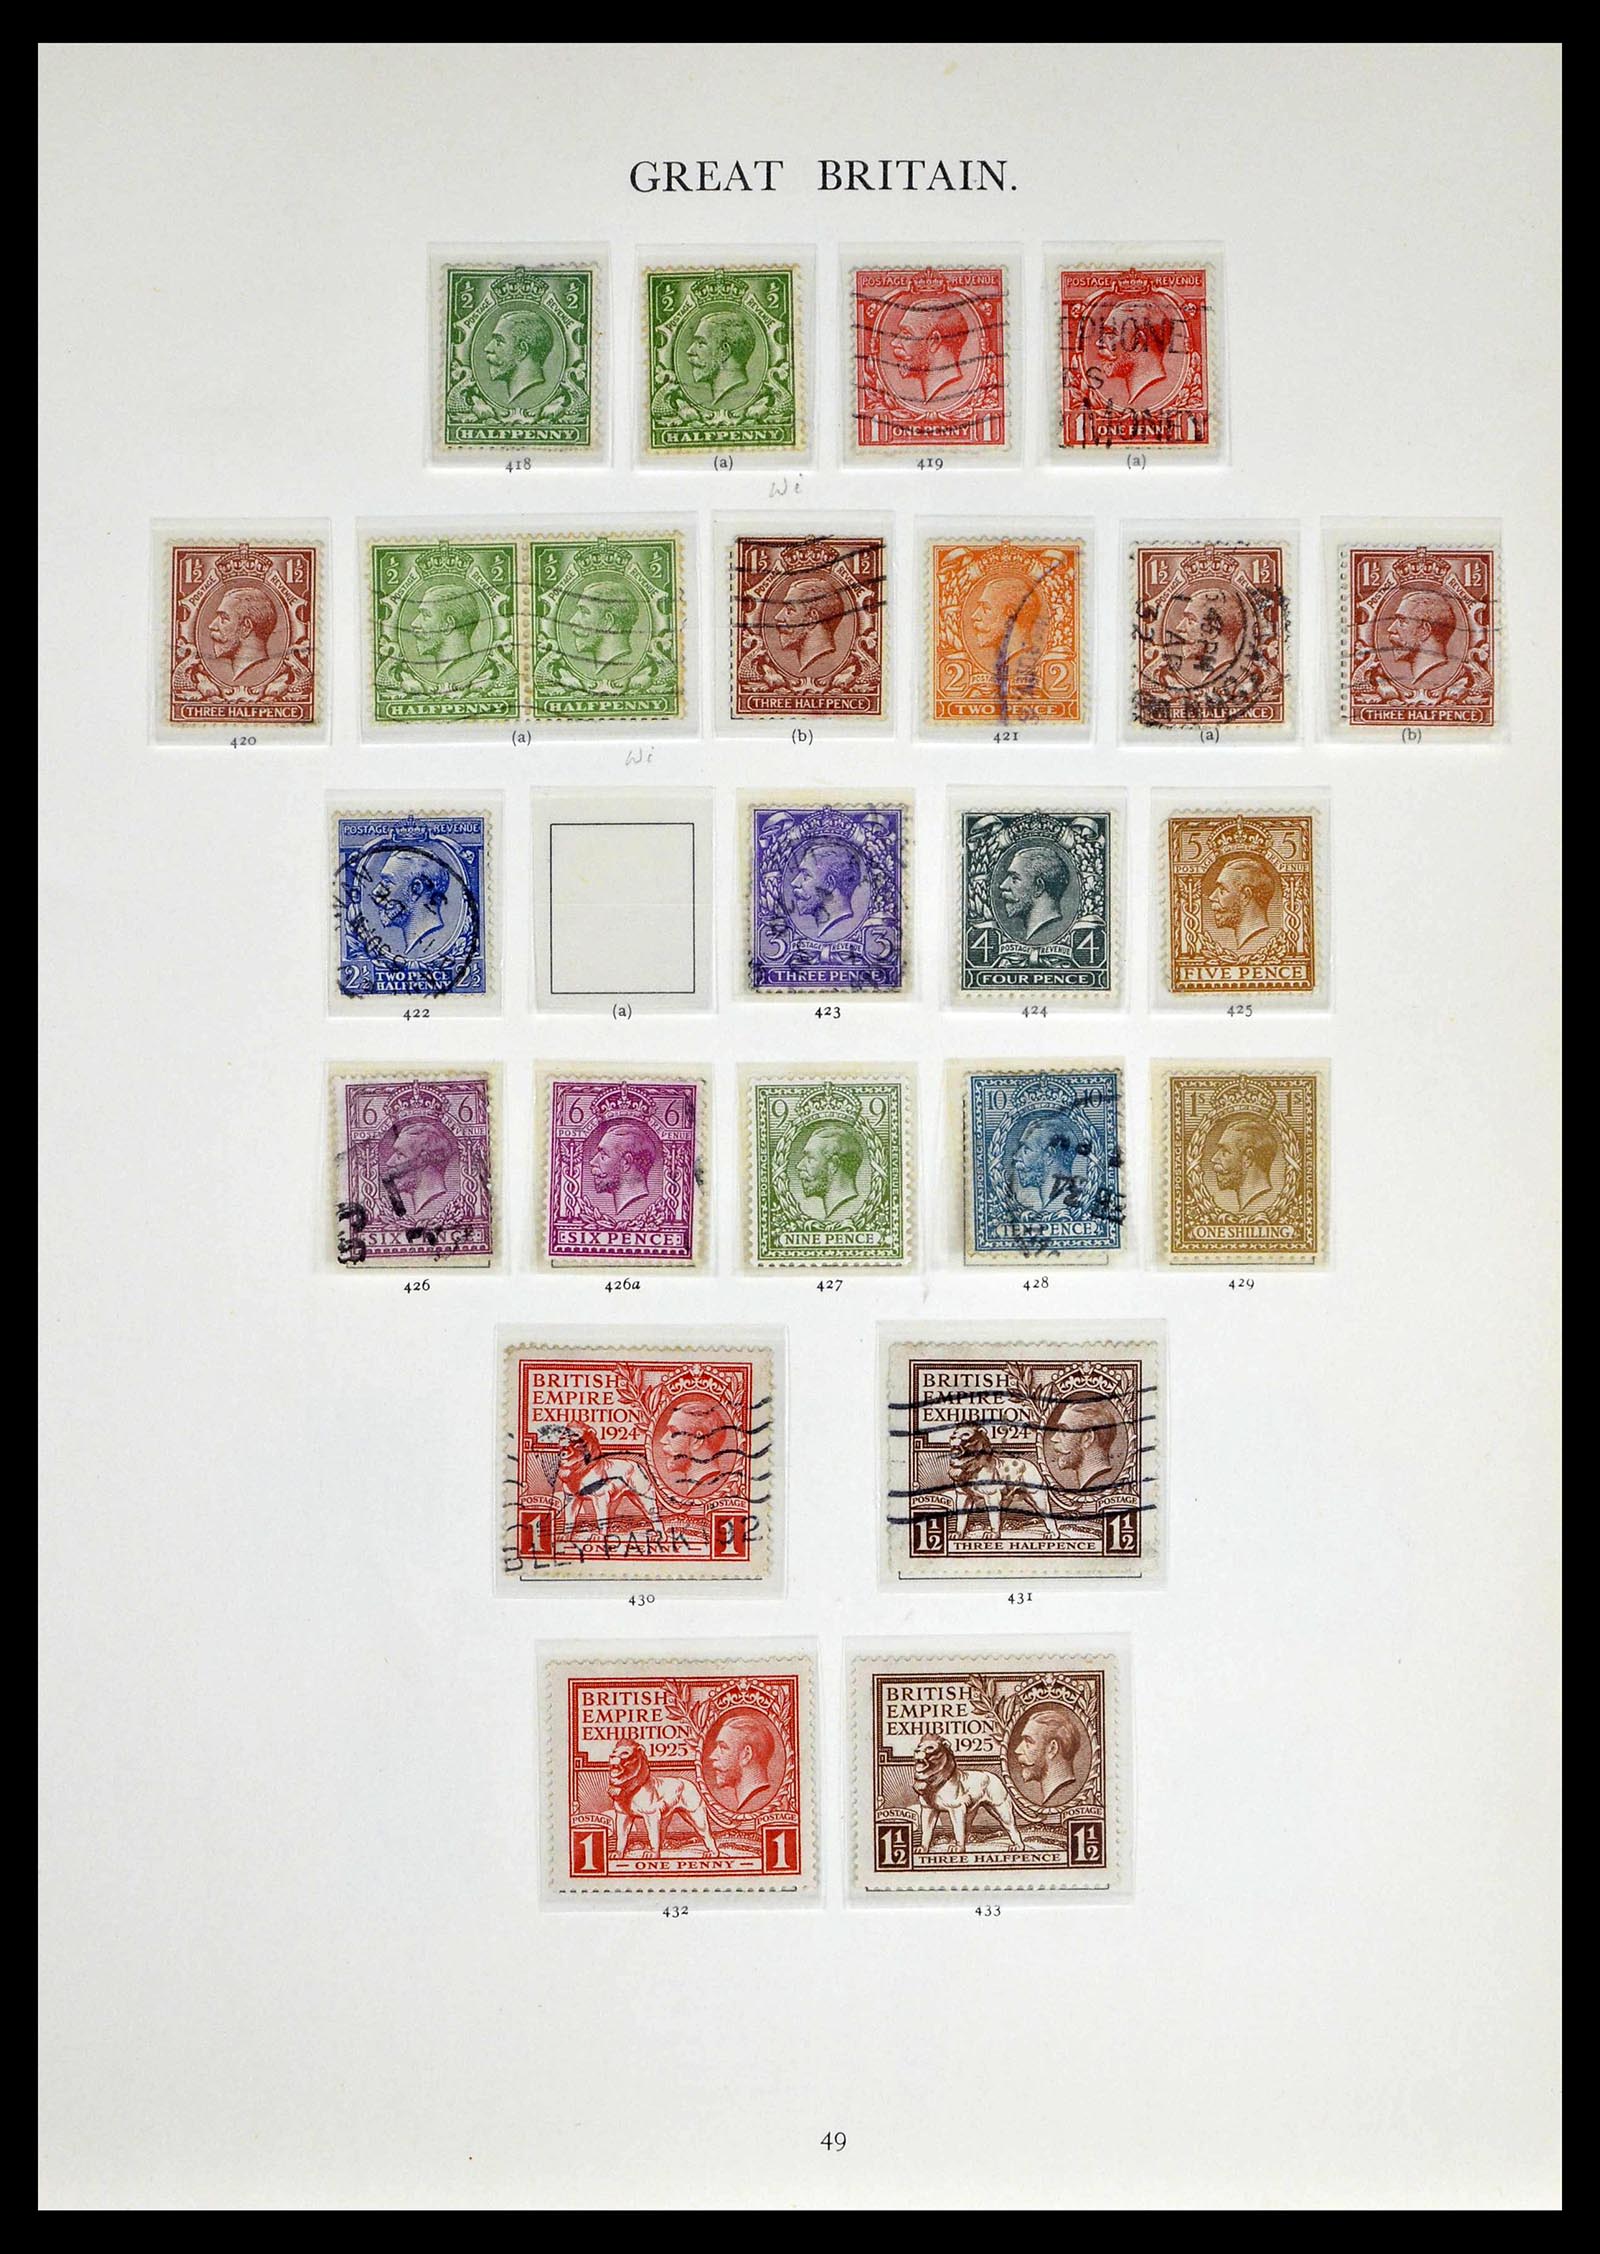 39025 0021 - Stamp collection 39025 Great Britain specialised 1840-1990.